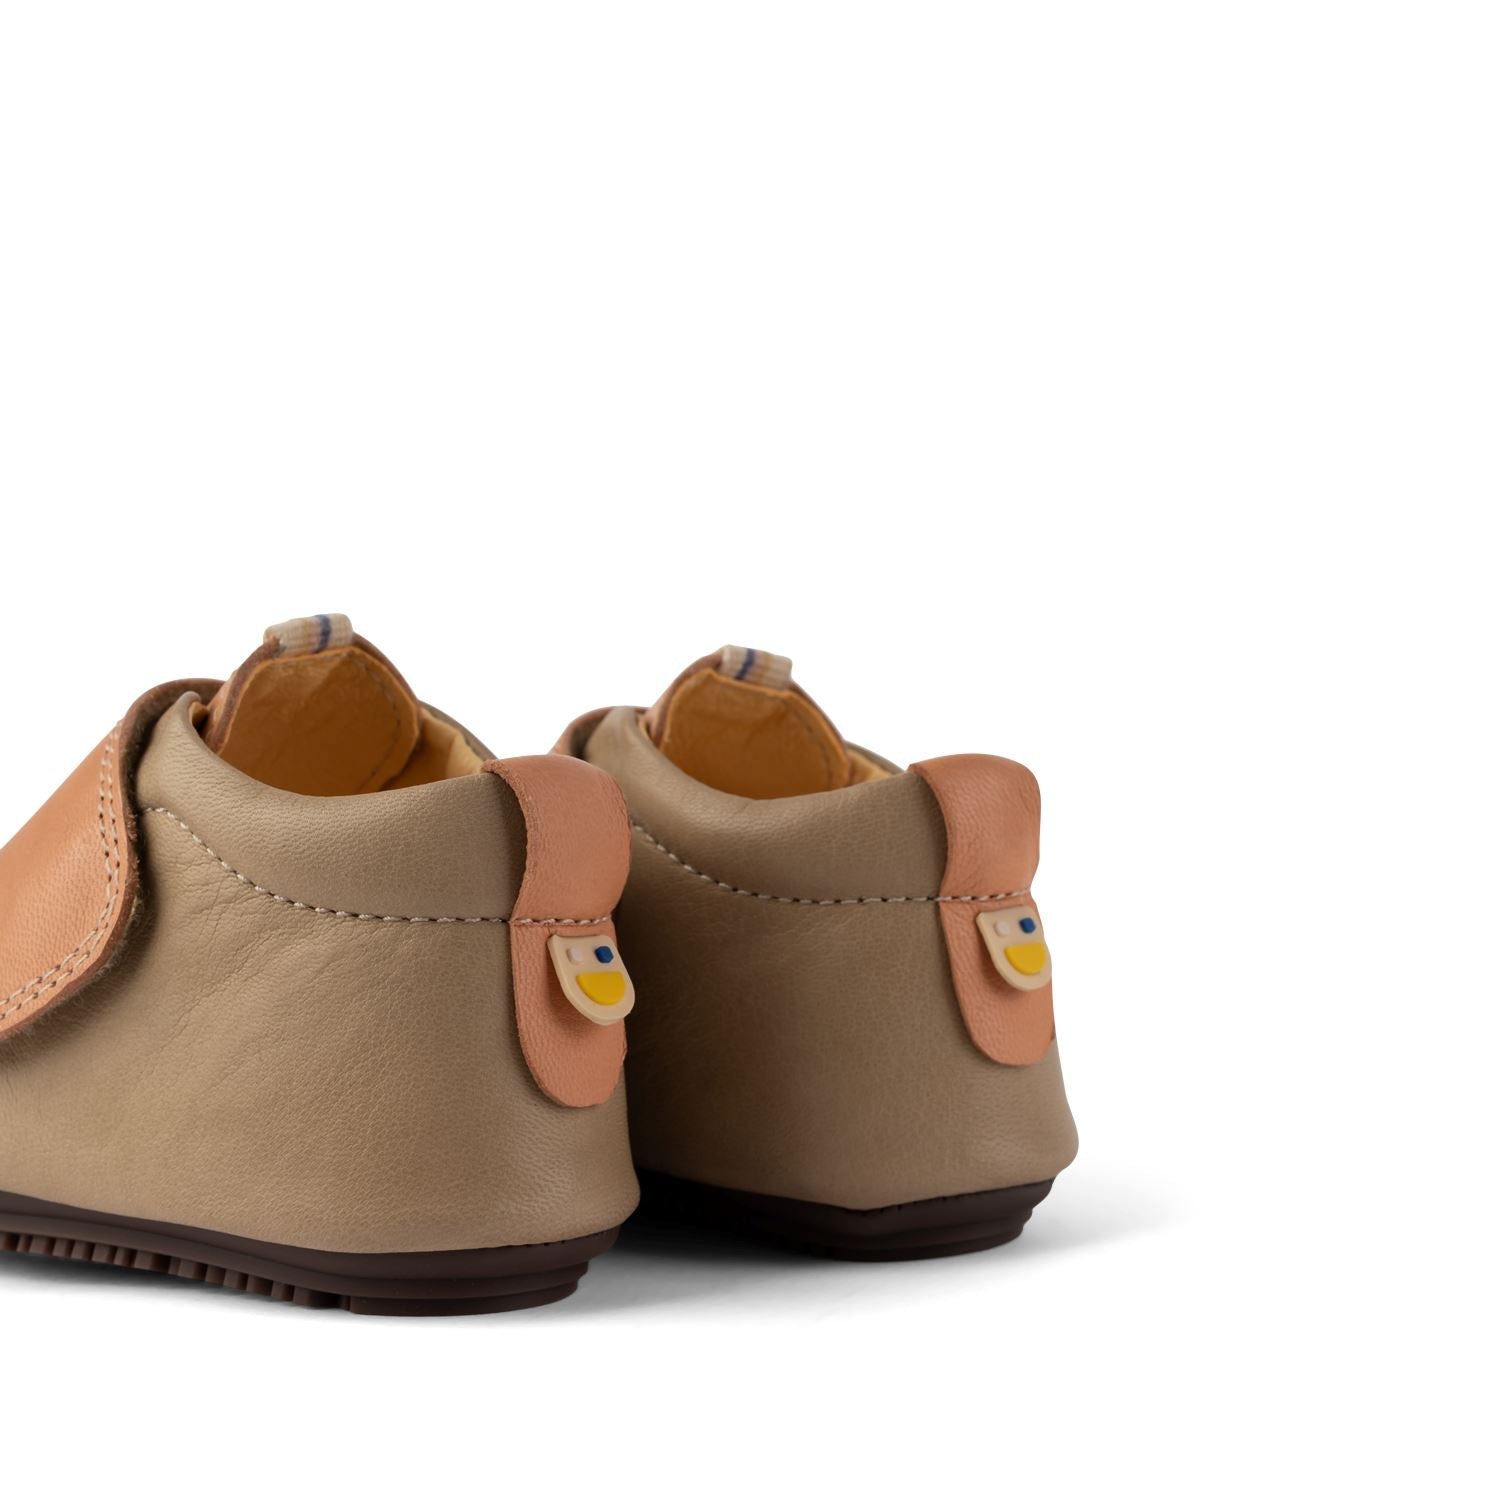 Amaretto/Peach Strap Chukka Shoes & Booties Dulis Shoes 